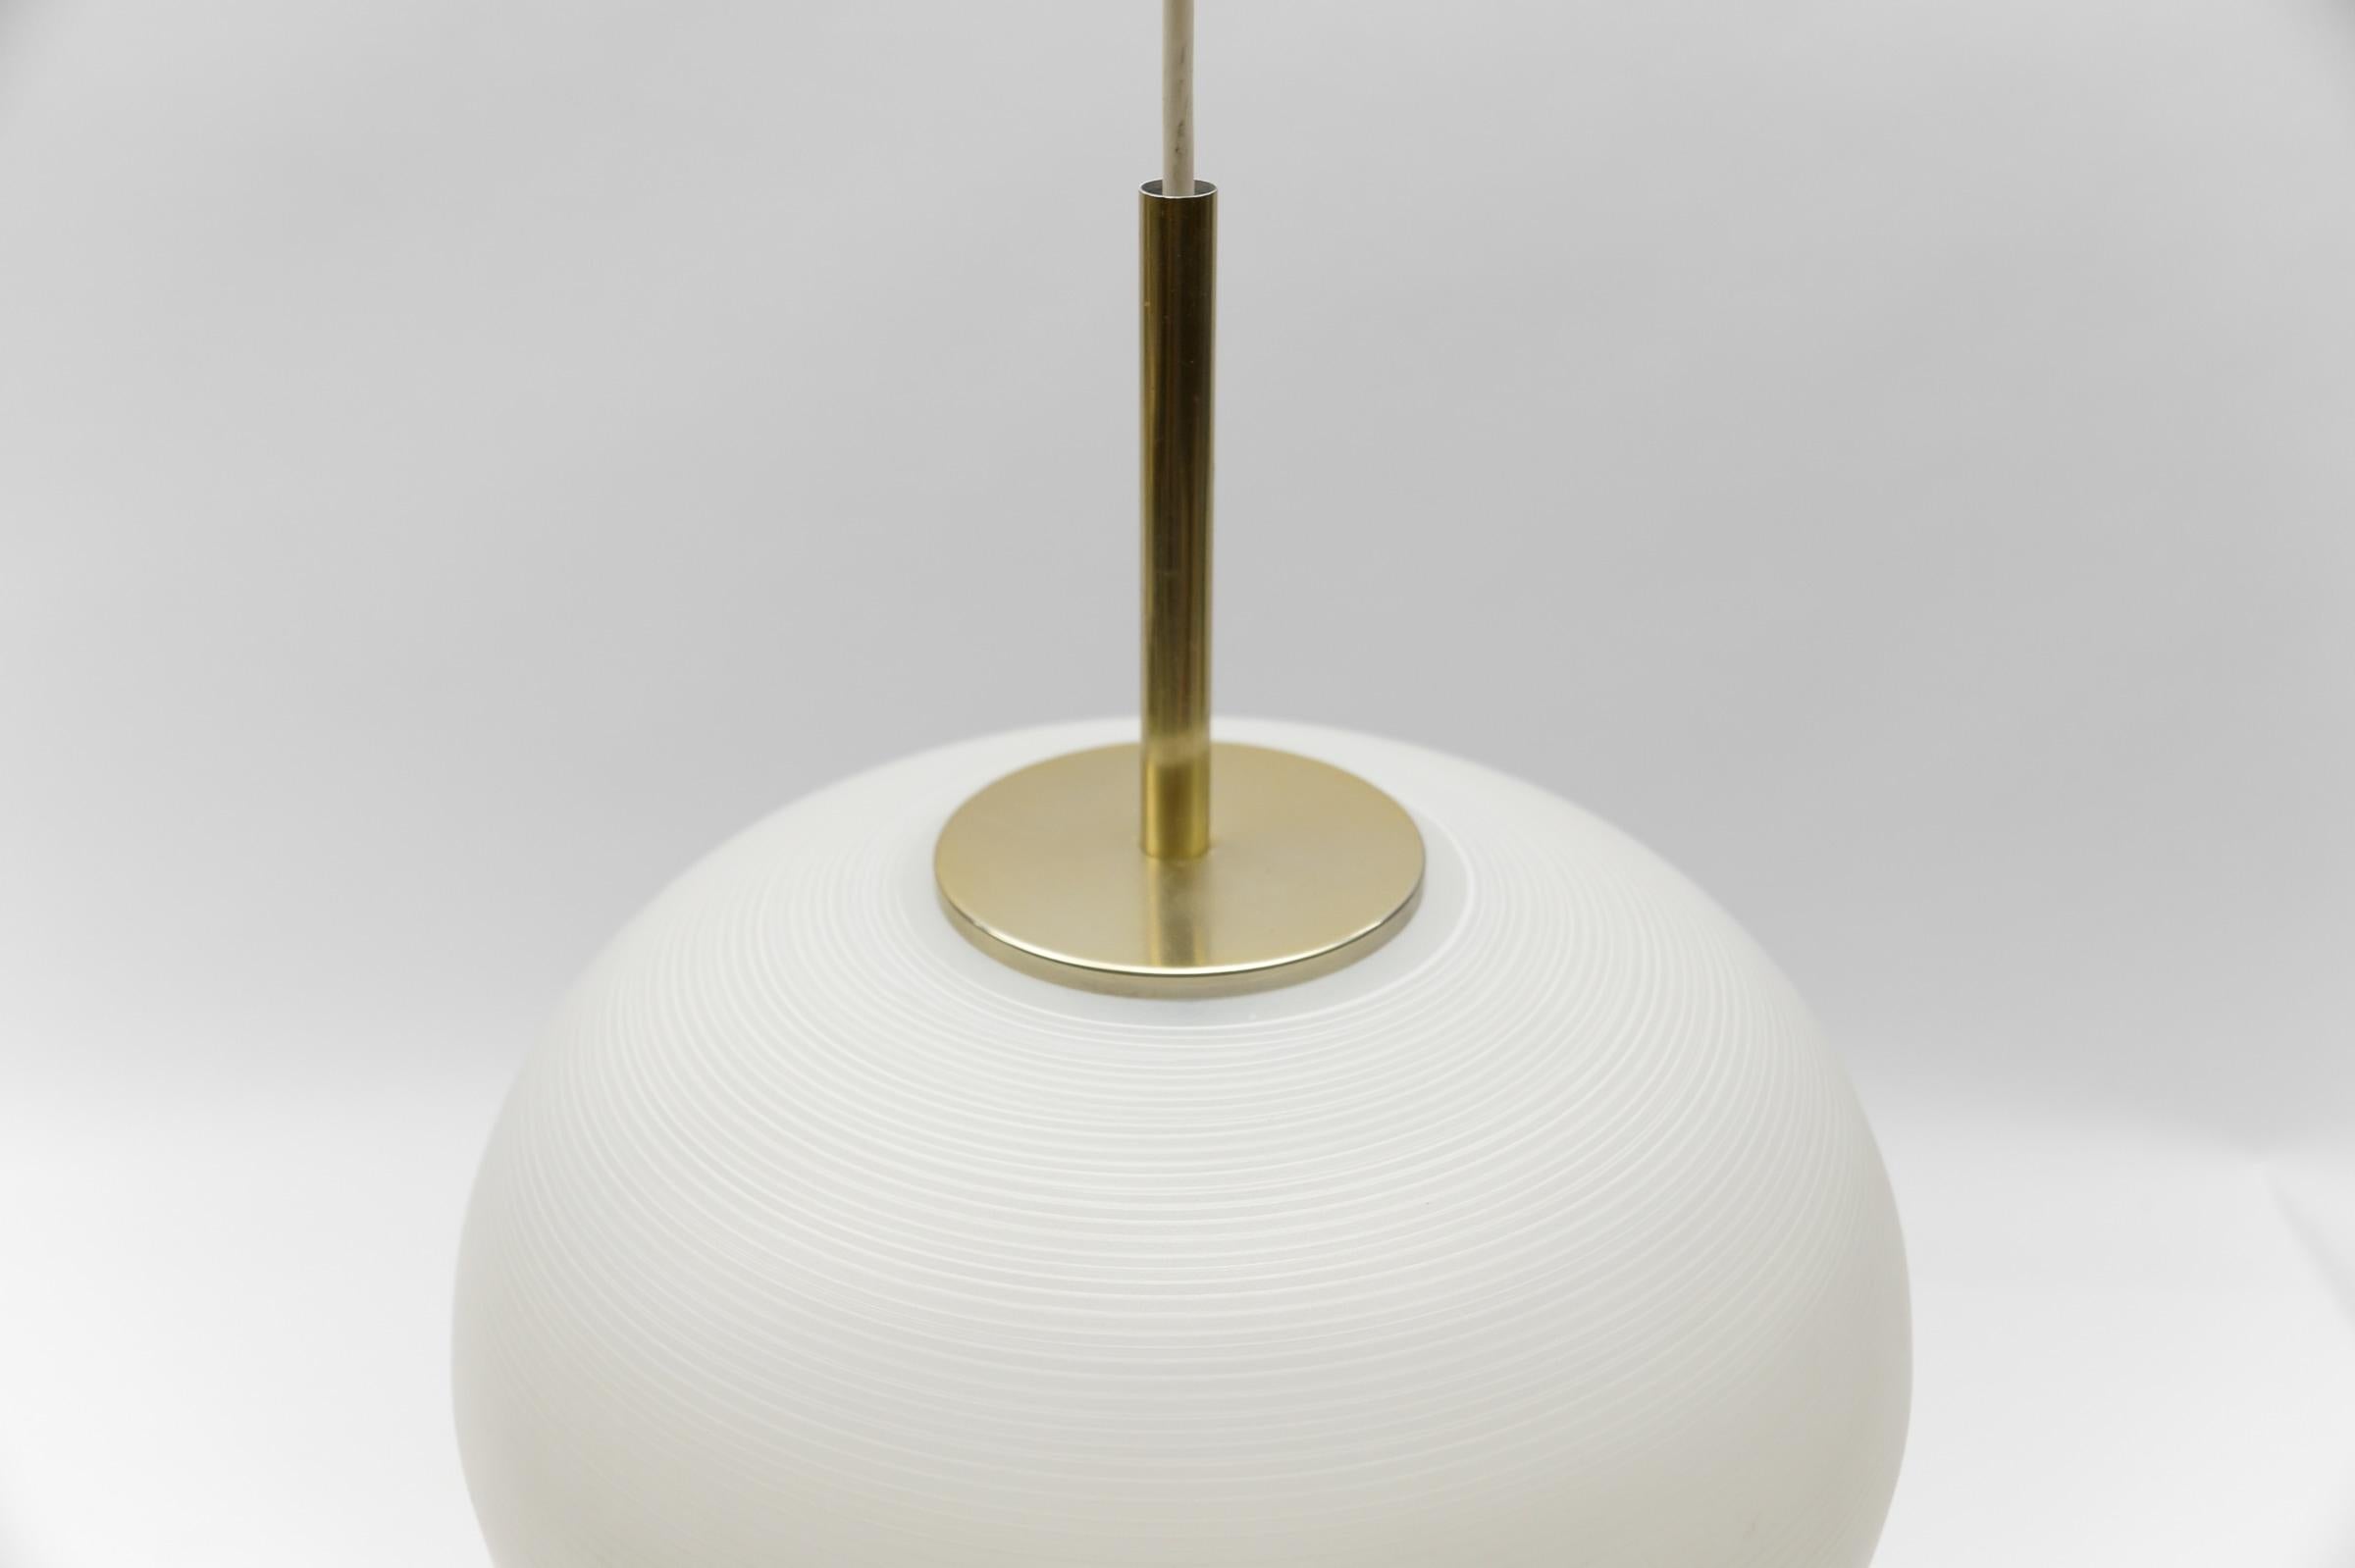 Mid Century Modern Opaline Glass Ball Pendant Lamp by Doria, 1960s Germany For Sale 5